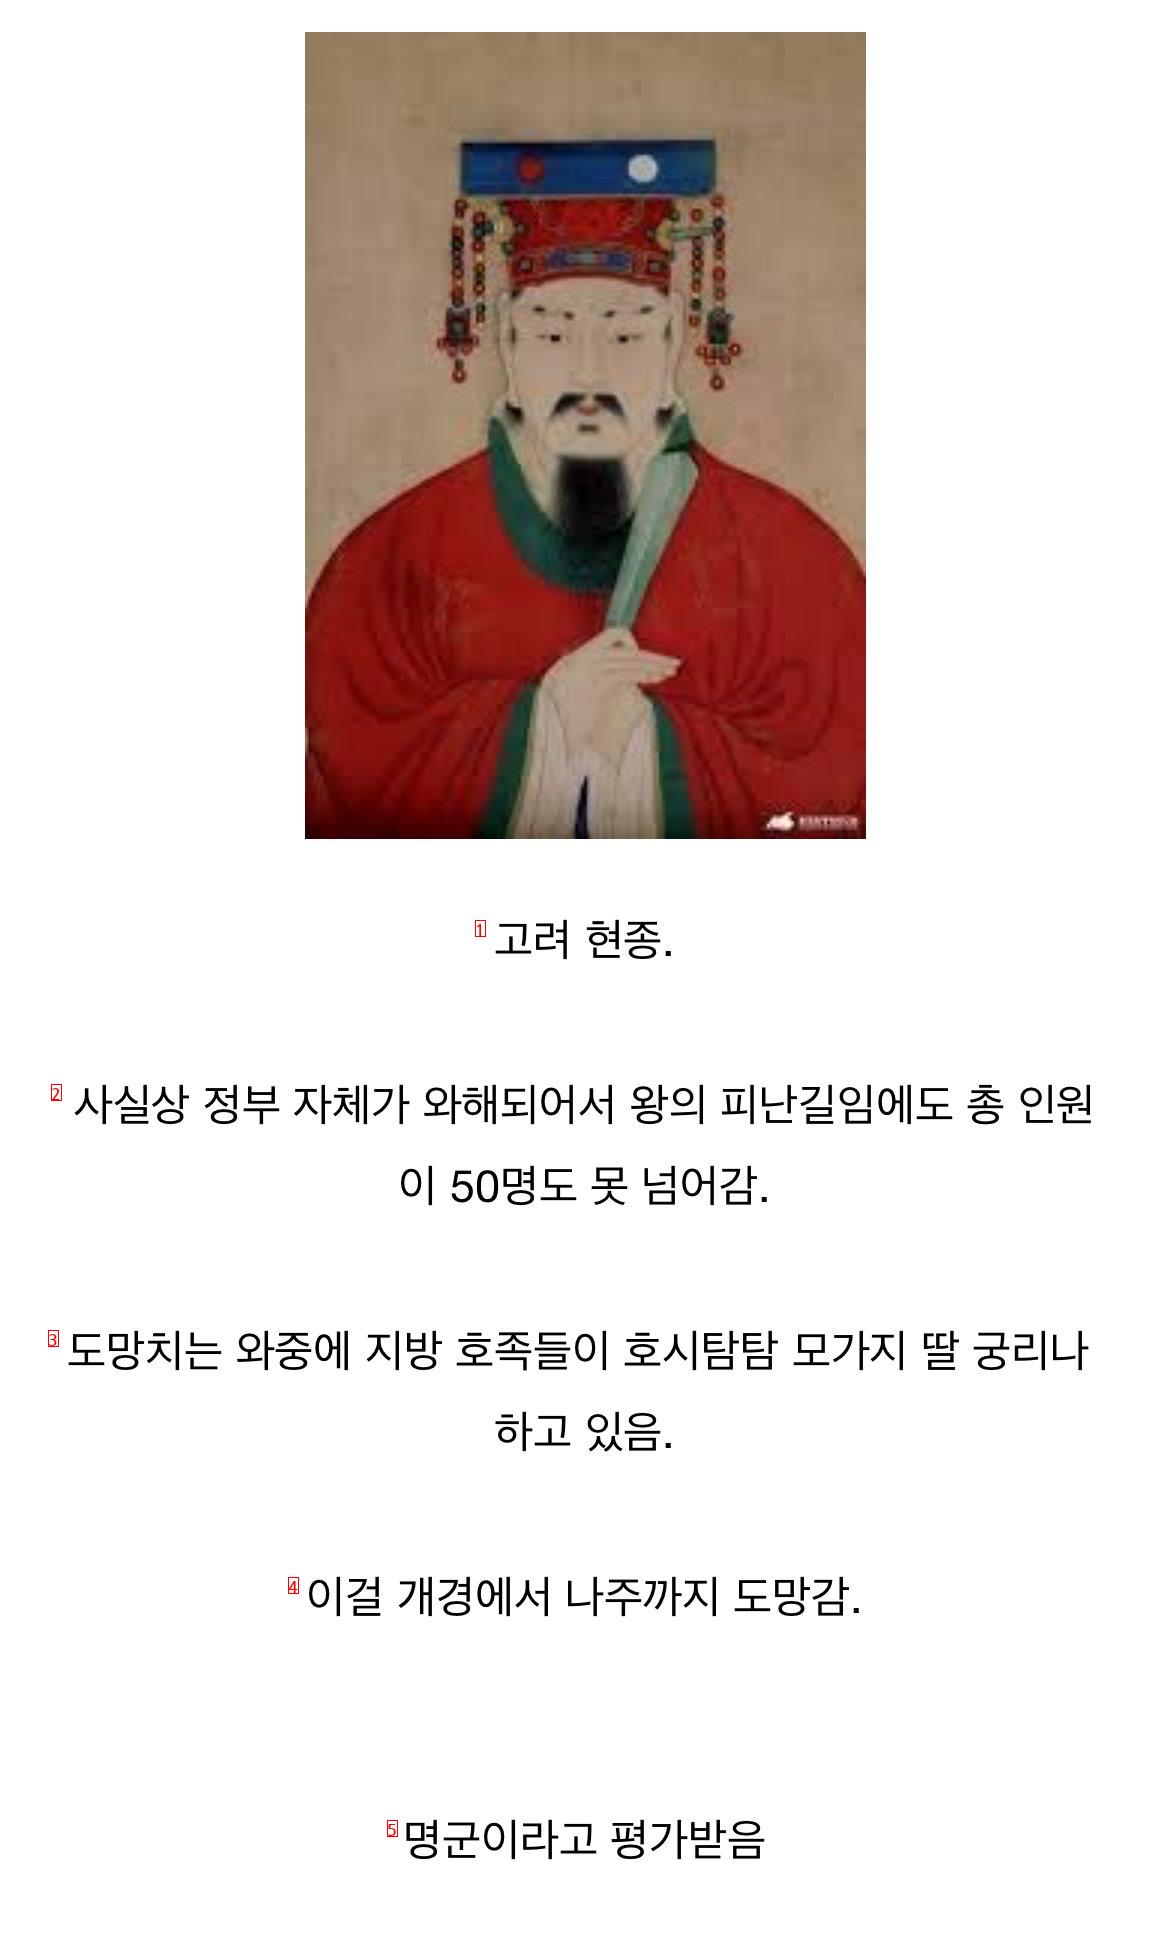 the most fugitive monarch in Korean history